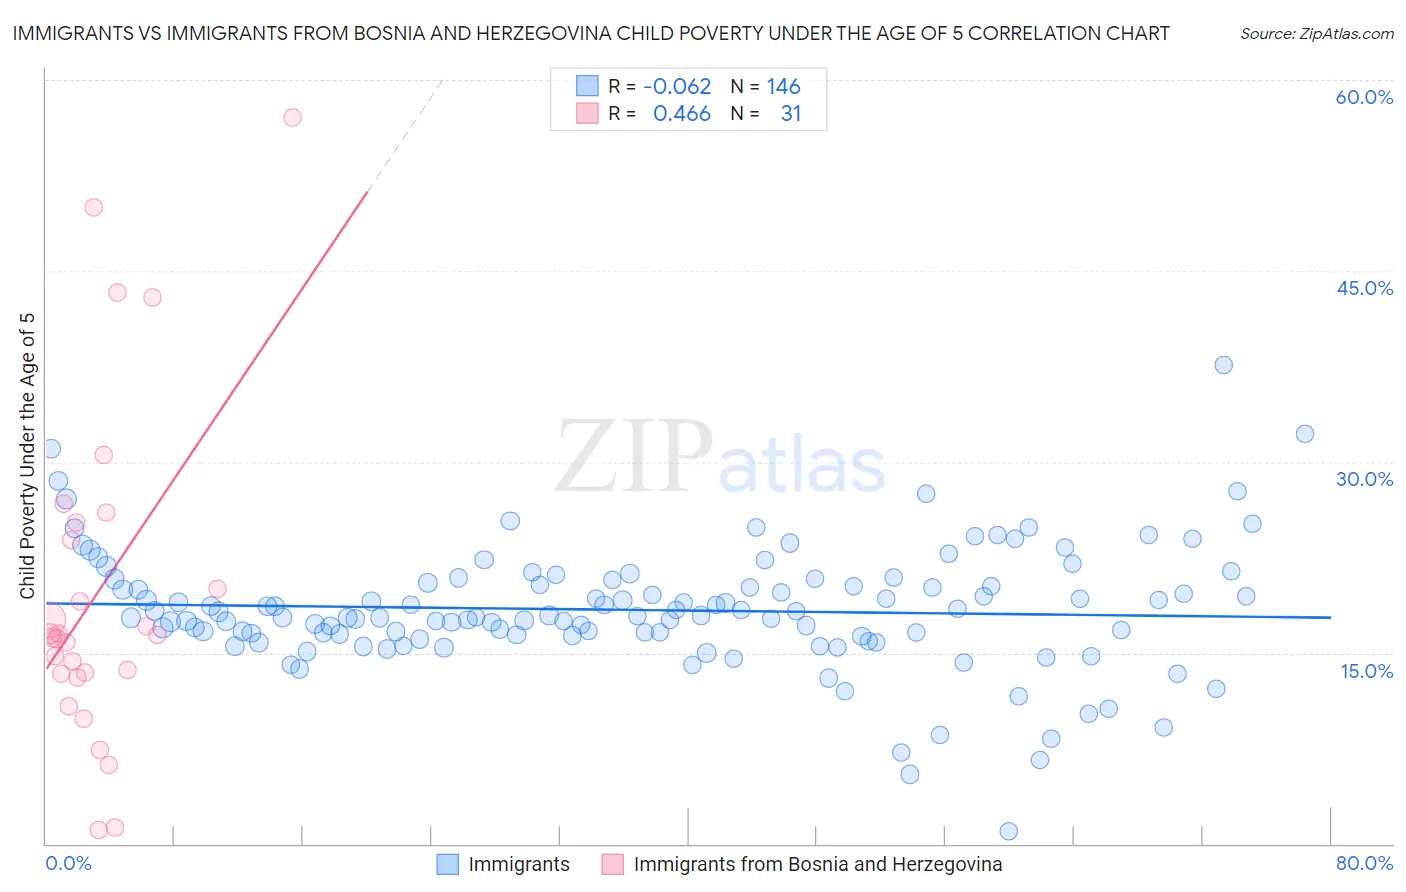 Immigrants vs Immigrants from Bosnia and Herzegovina Child Poverty Under the Age of 5